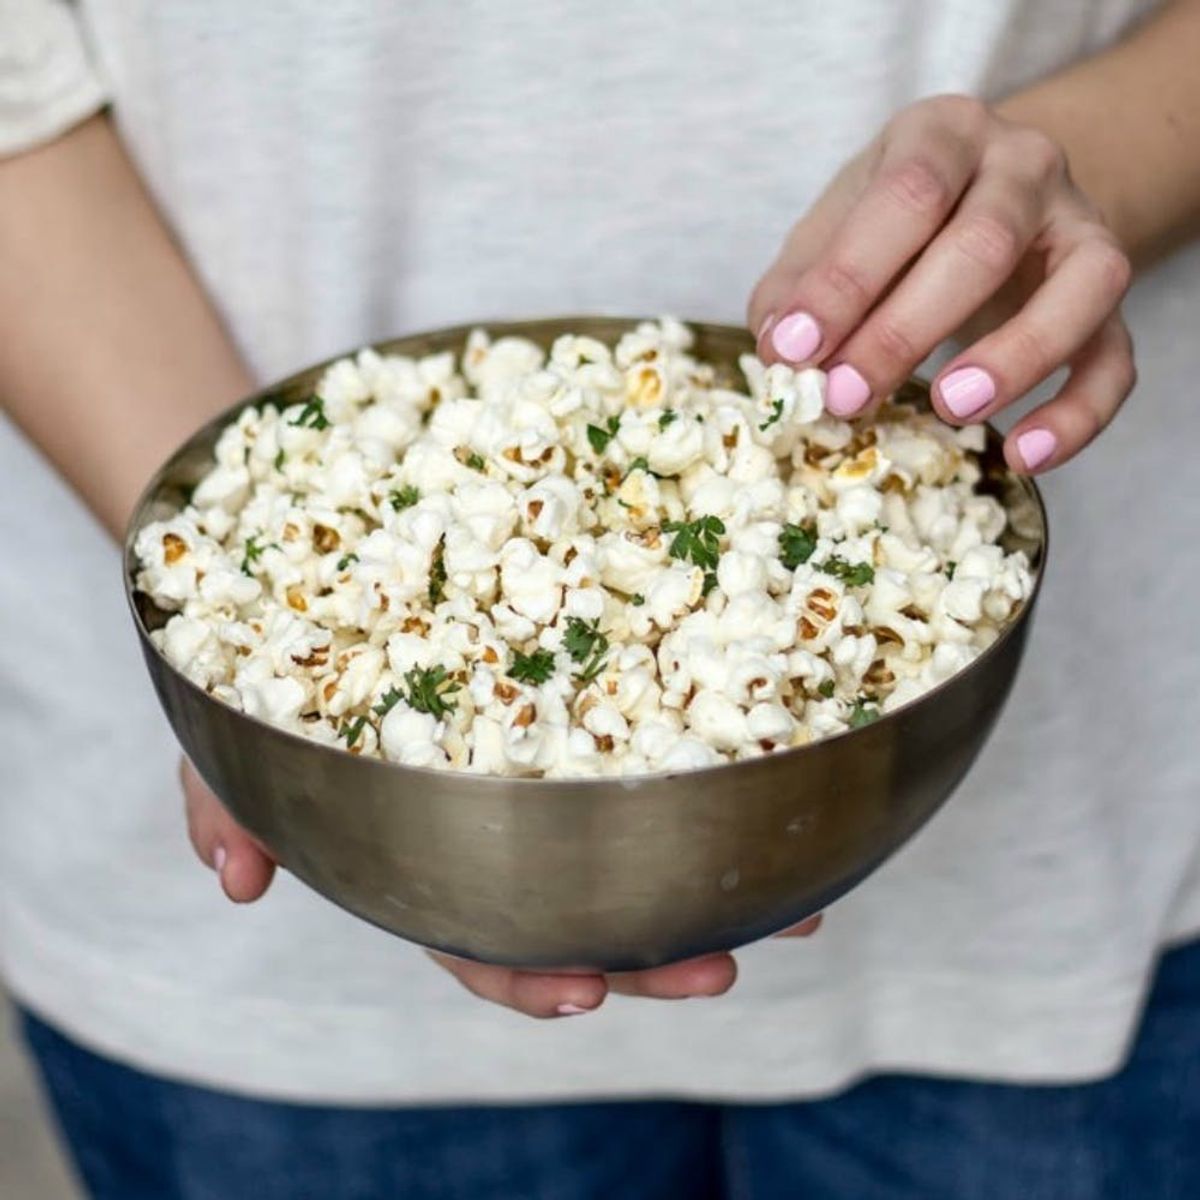 What’s Poppin’: 18 Popcorn Blends for Binge-Watching Madness